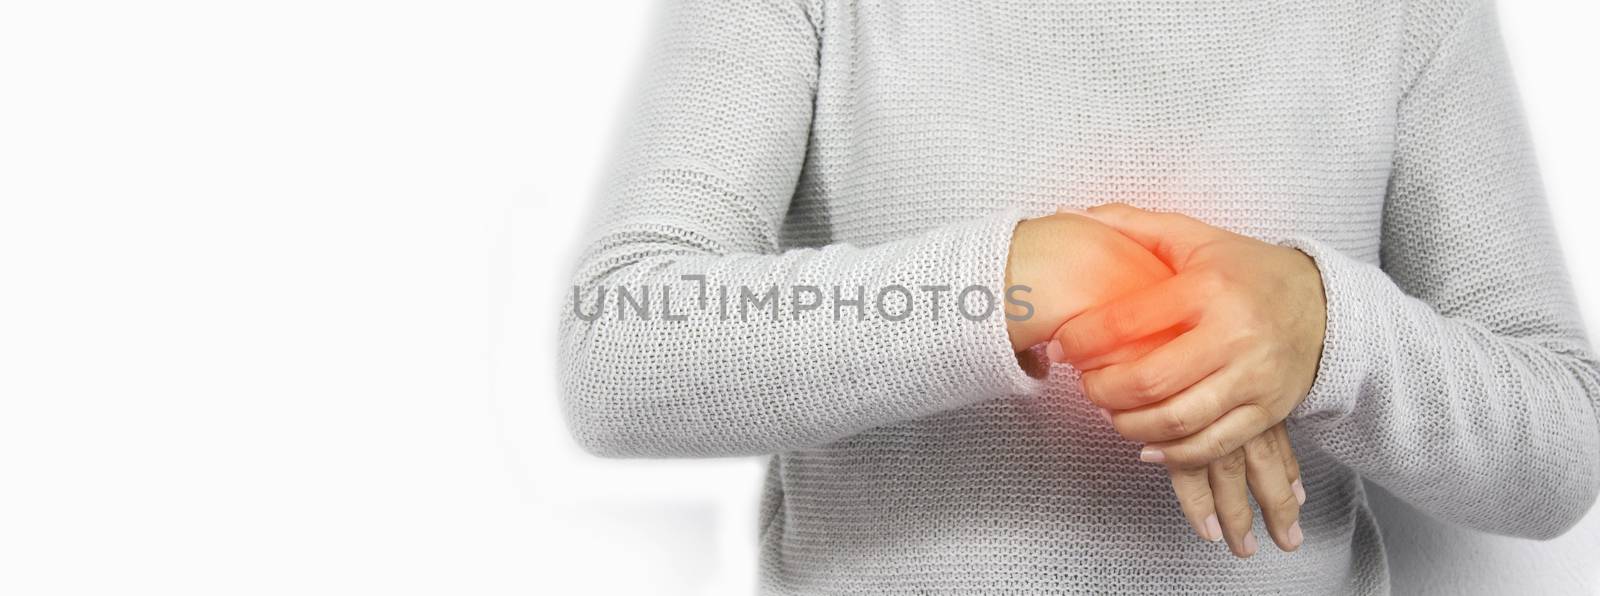 Young women hold her wrist with suffering from arthritis or Carpal tunnel syndrome from work, isolated on white background.